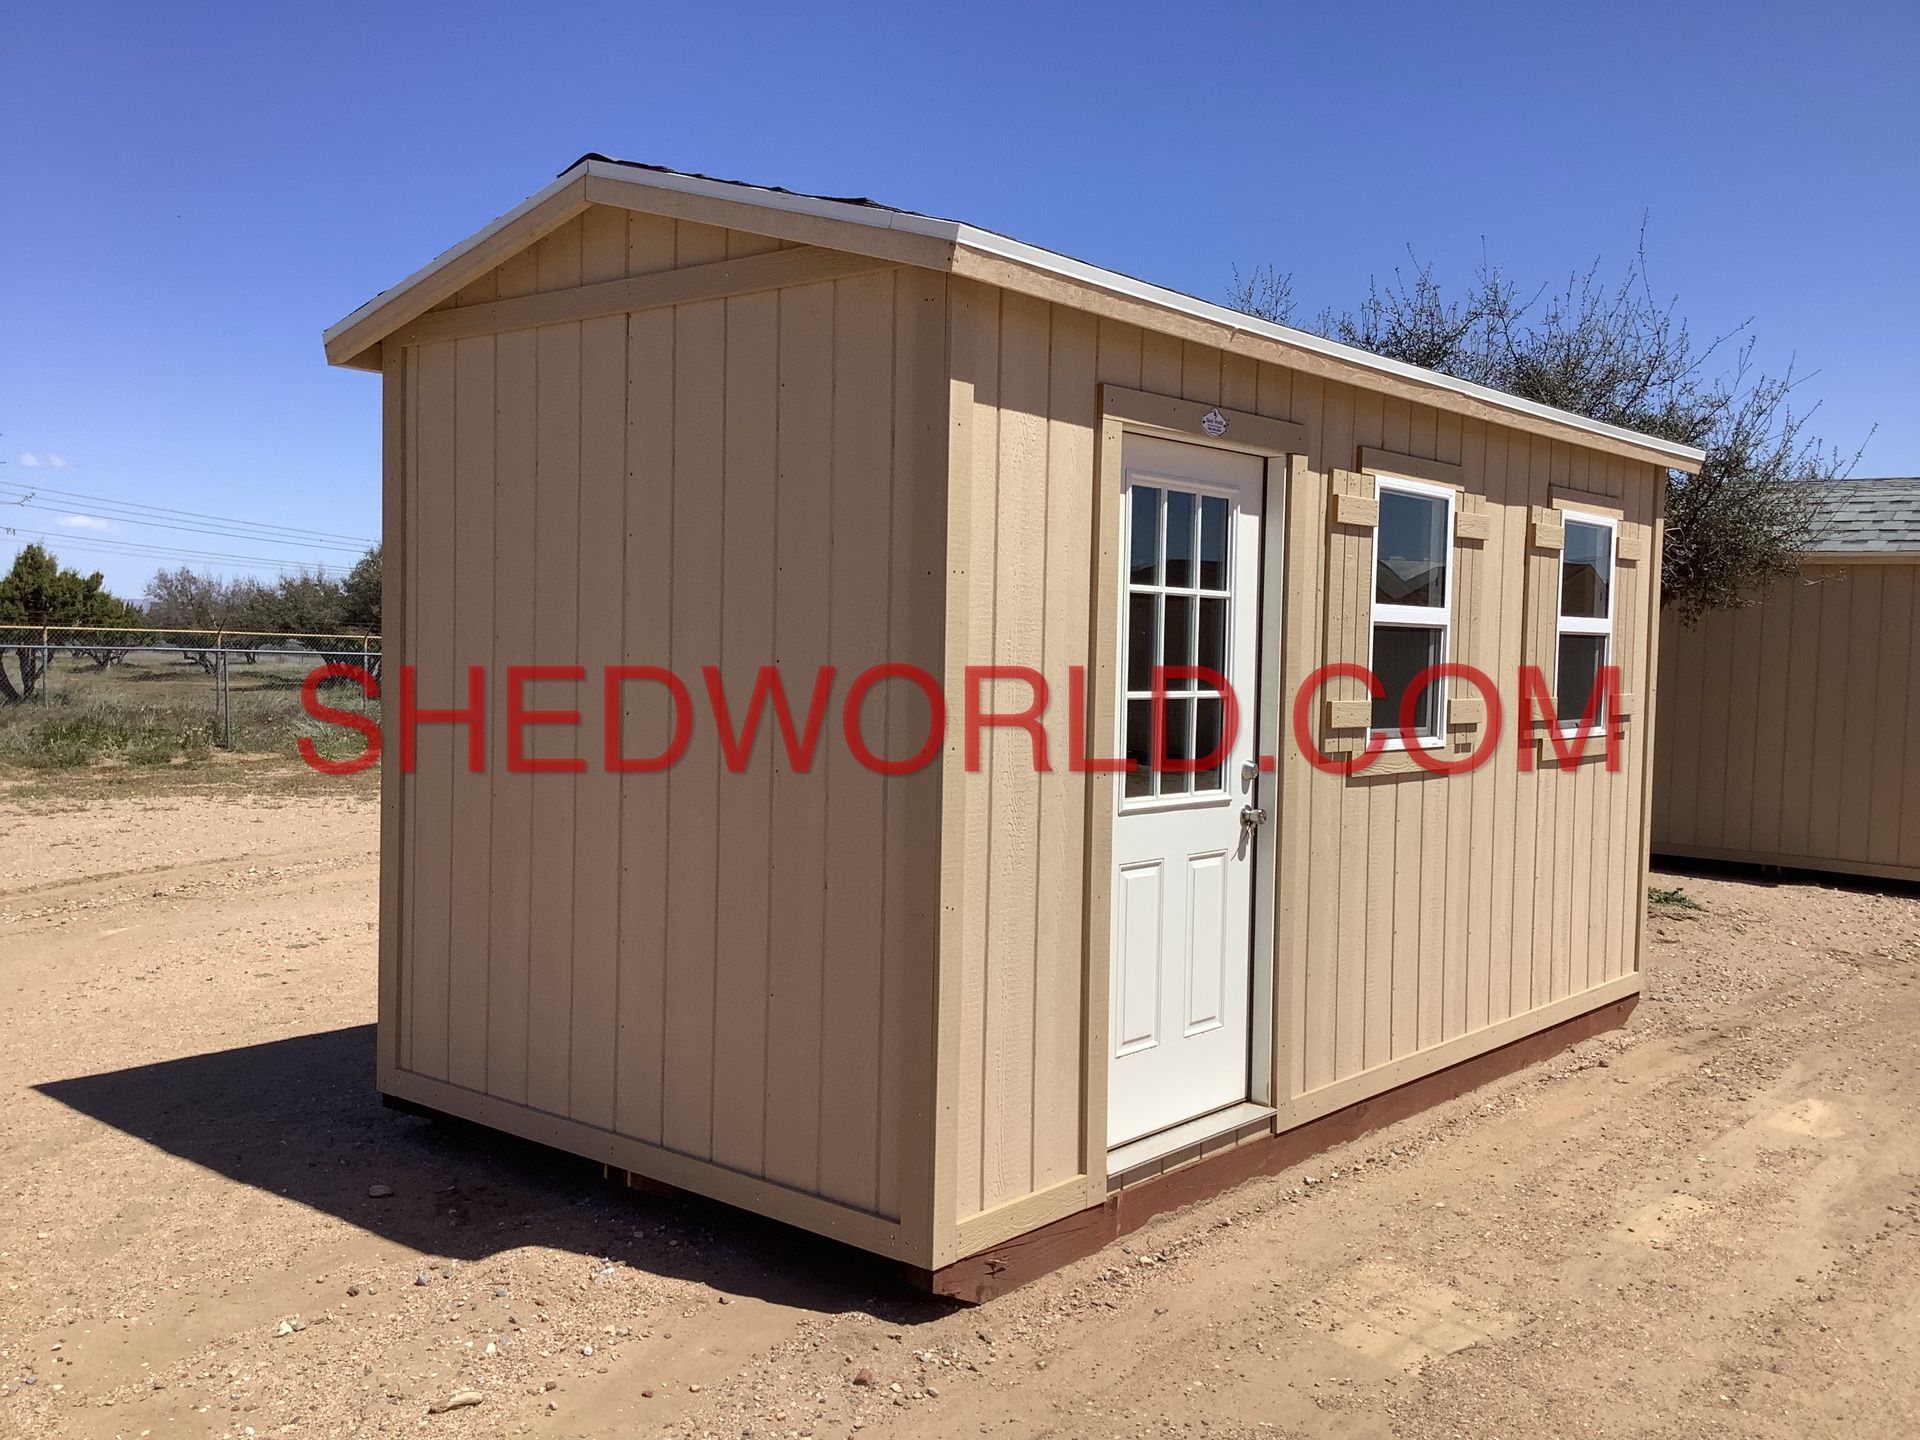 16x8 Shed $6599 Plus Delivery